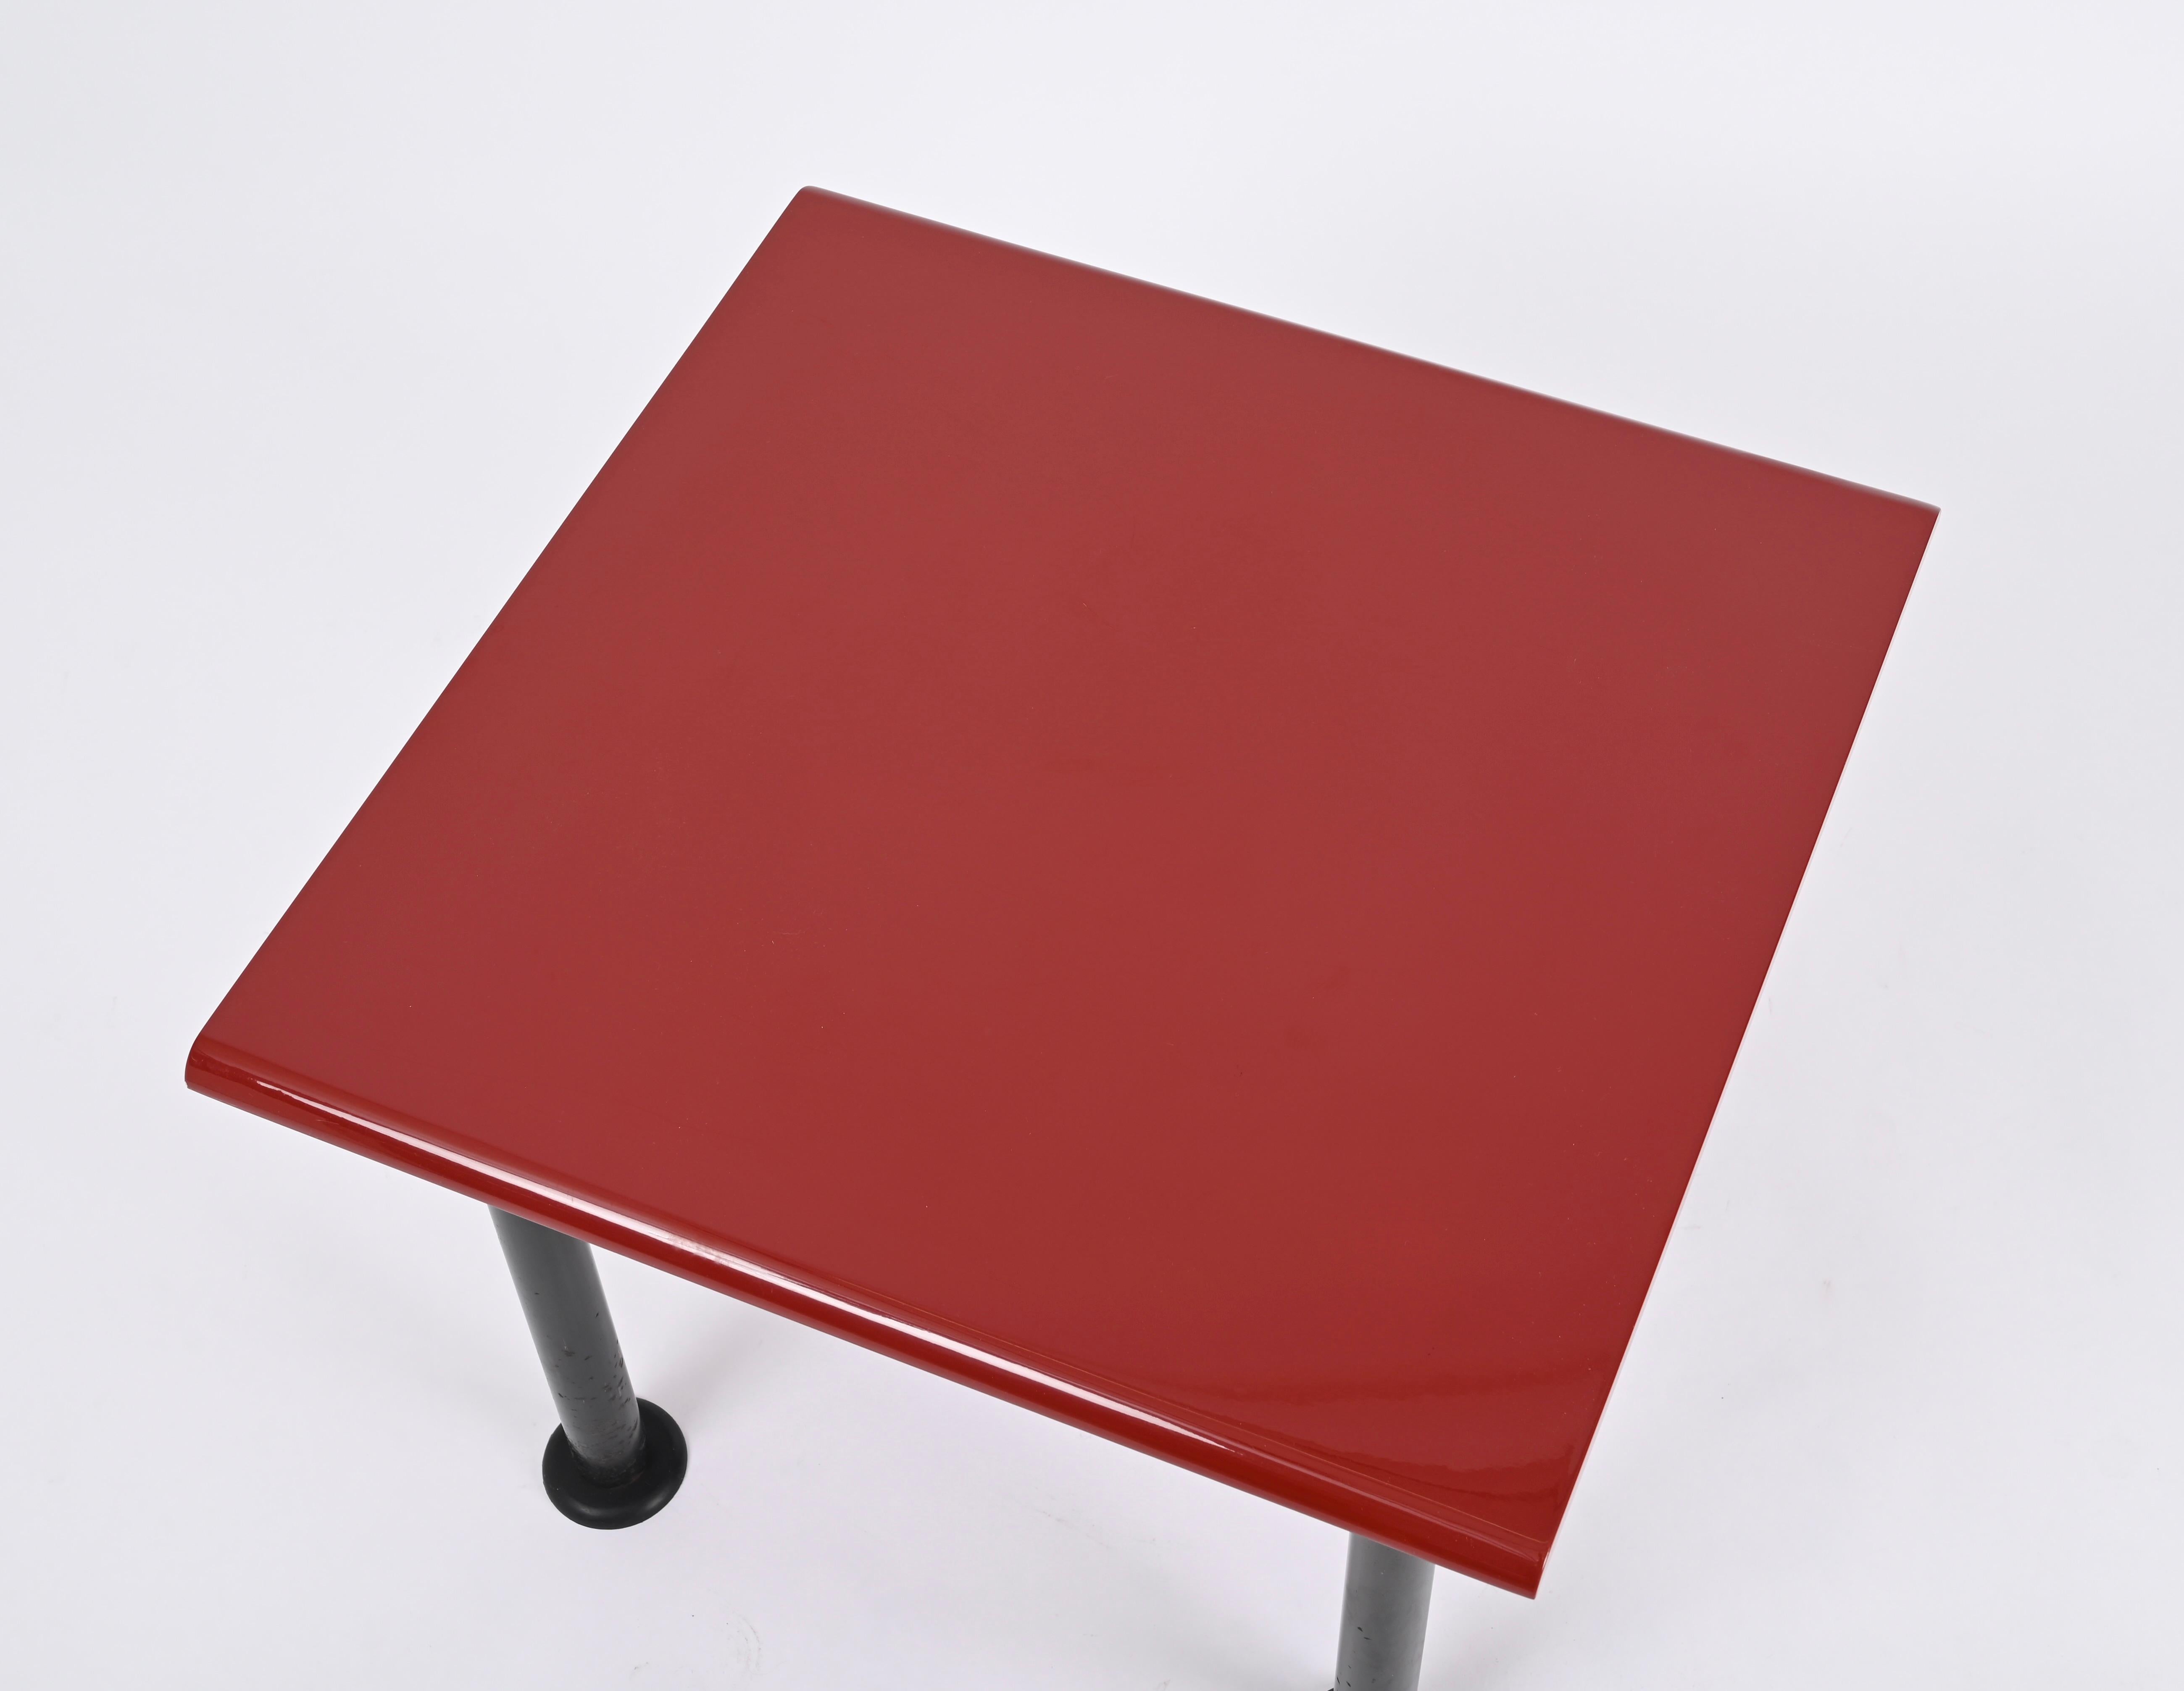 Midcentury Memphis Style Square Coffee Table with Cardinal Red Top, Italy 1980s For Sale 3